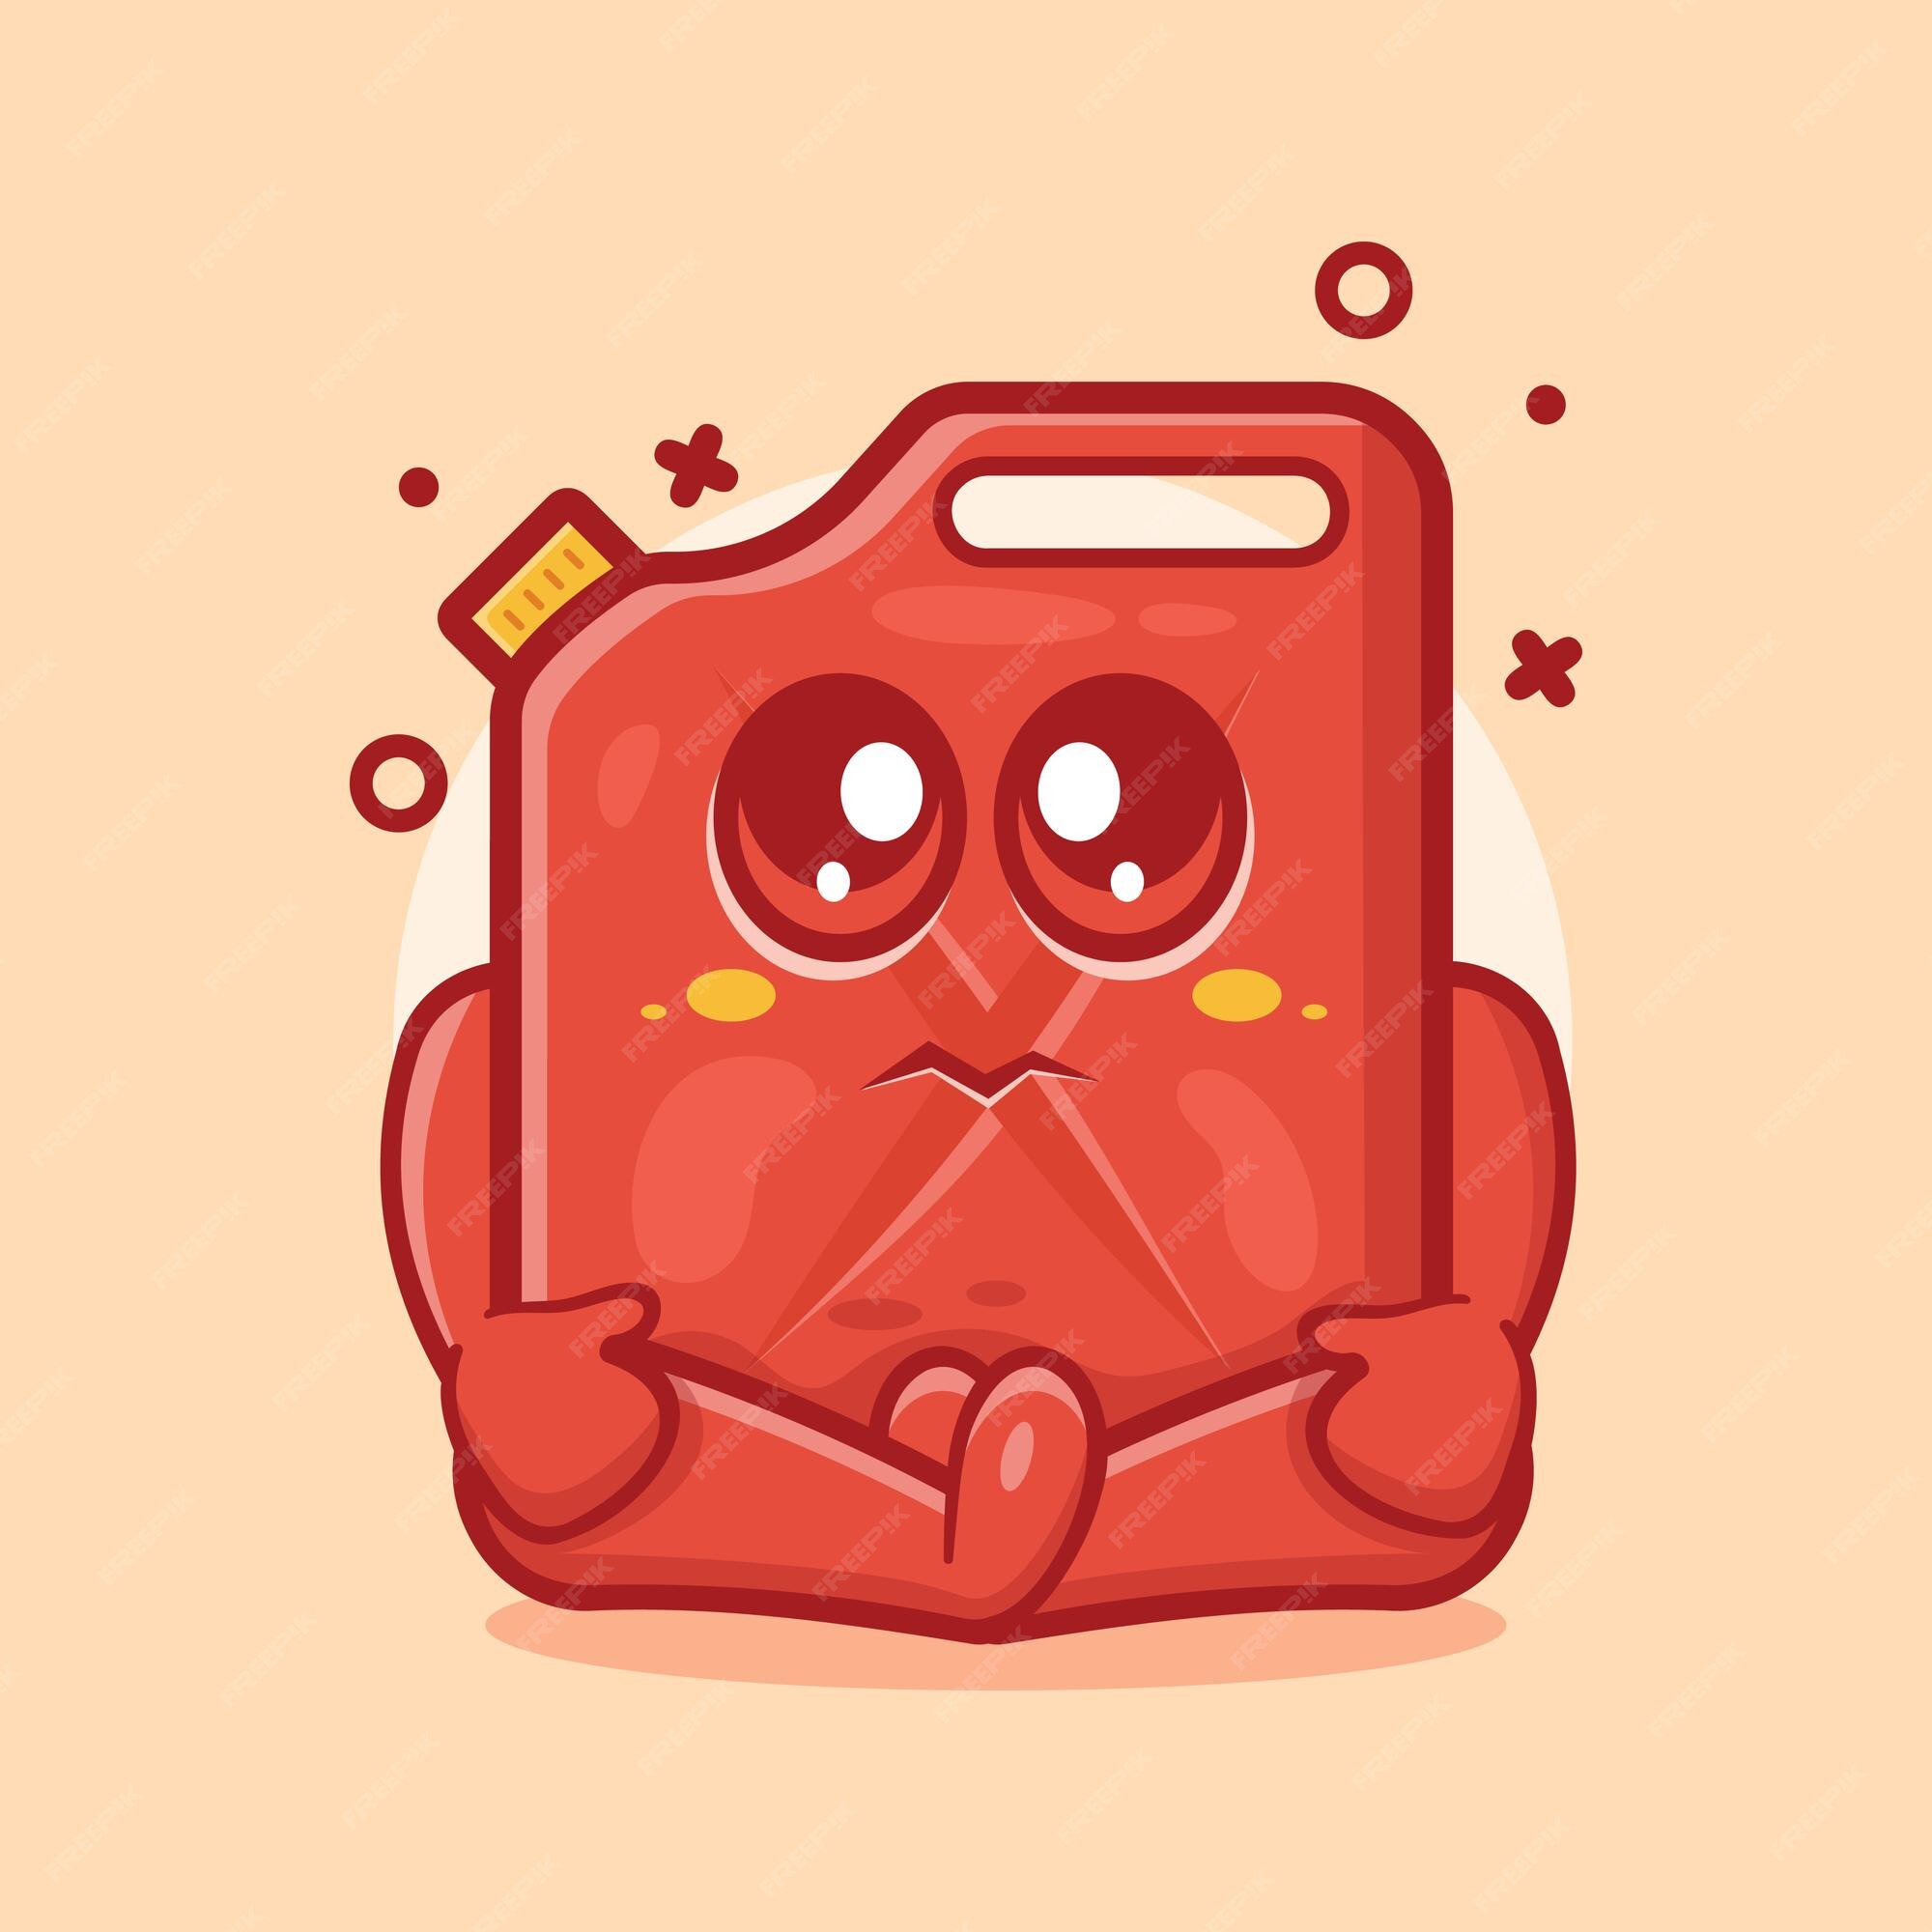 funny-fuel-jerrycan-character-mascot-with-sad-expression-isolated-cartoon-flat-style-design_574864-401.jpg